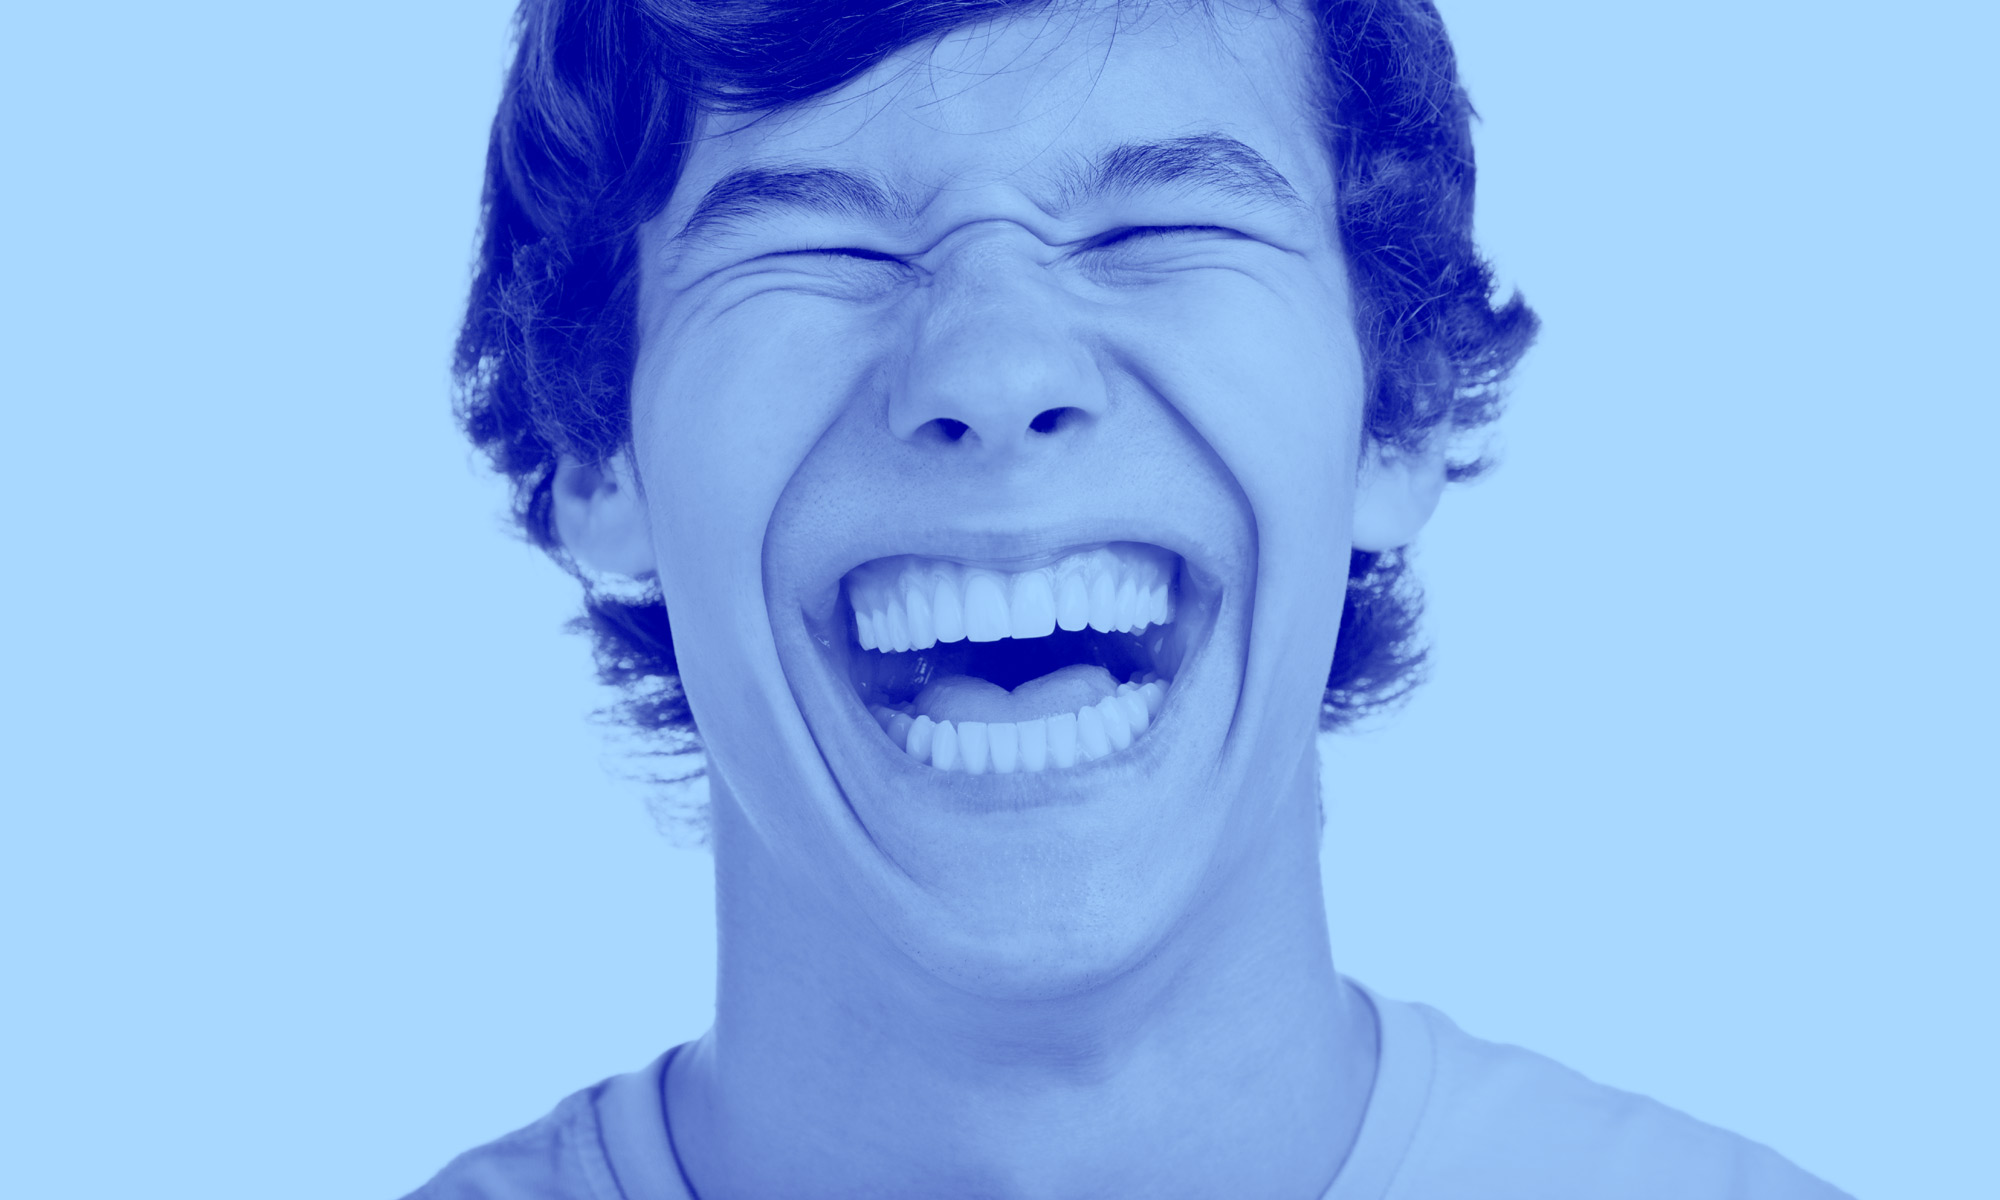 How Scientists Make People Laugh To Study Humor